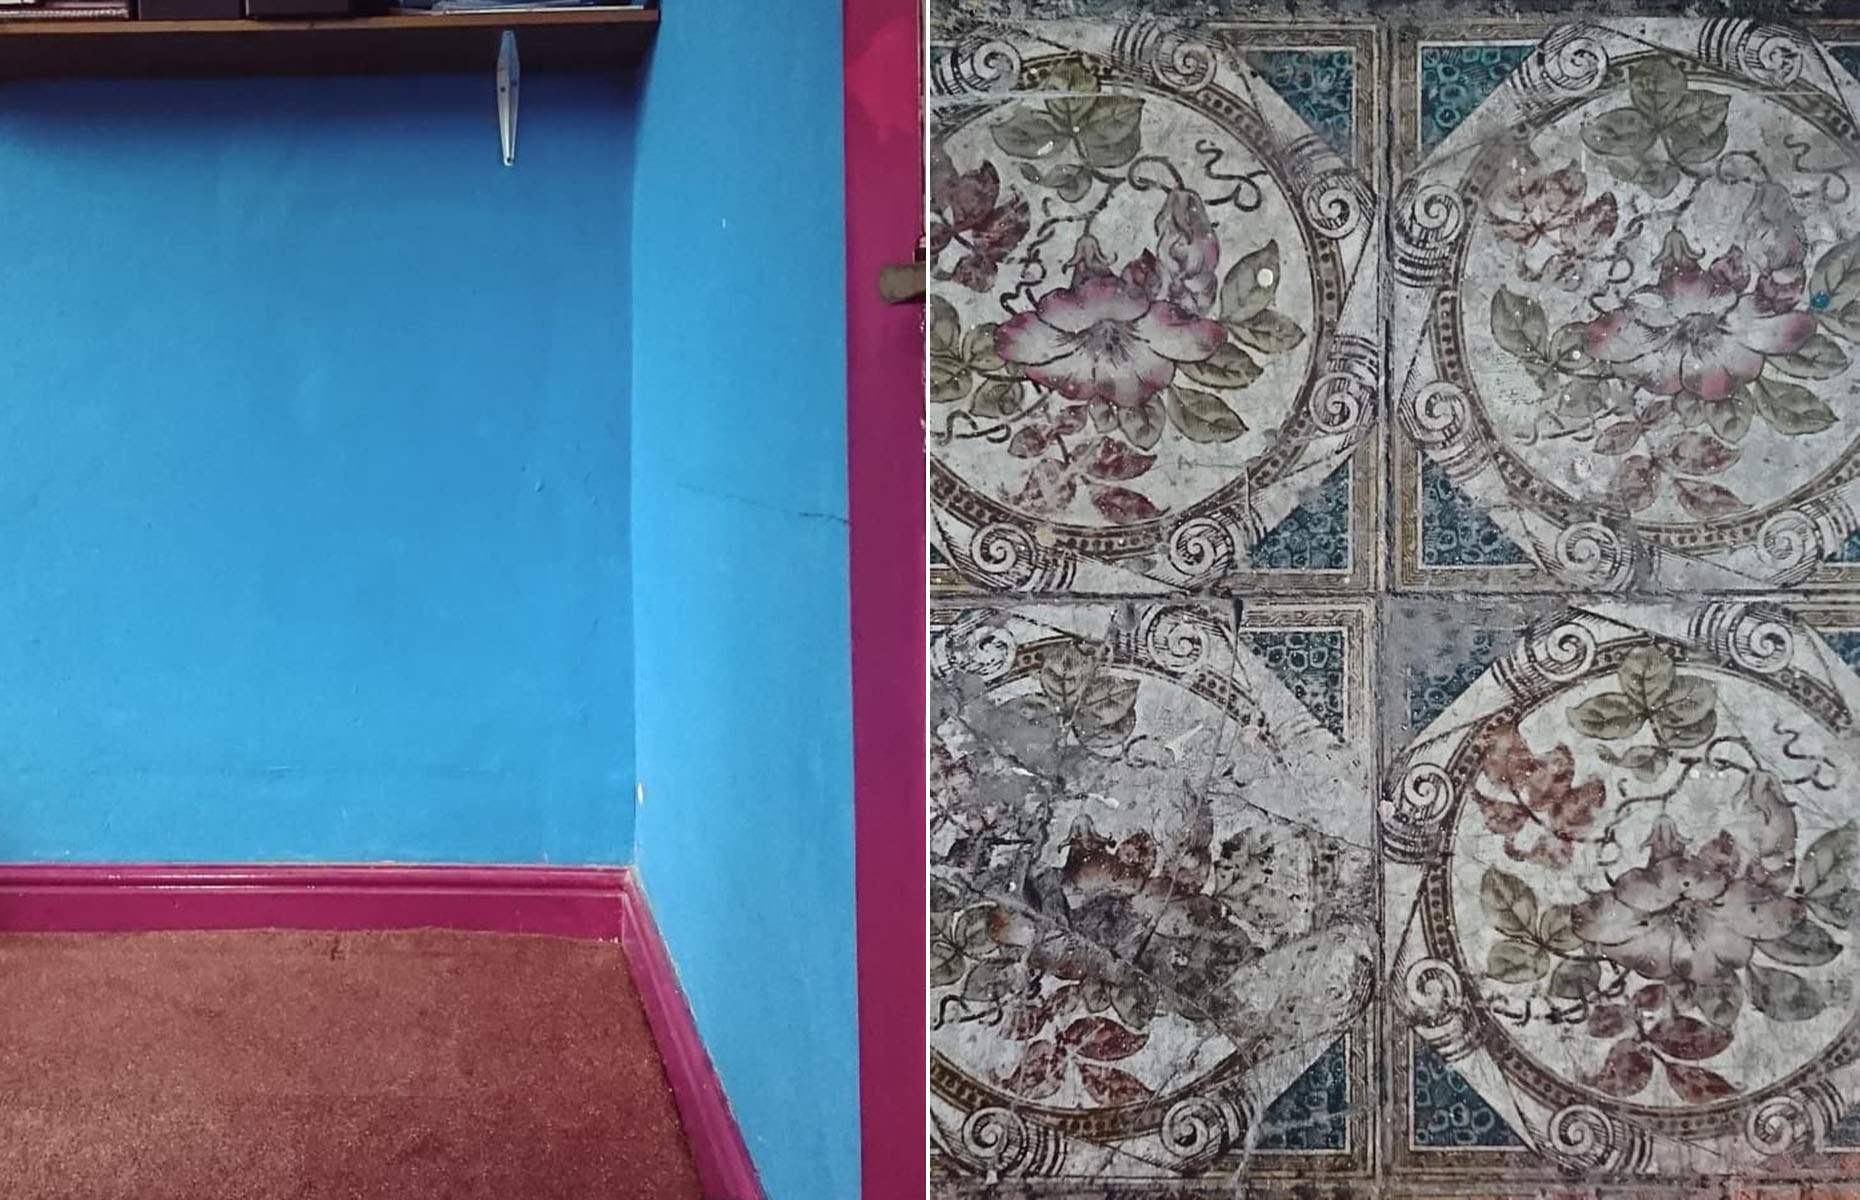 These decorative tiles will get a new lease of life in this Victorian home. Image: @cedarwoodterrace / Instagram